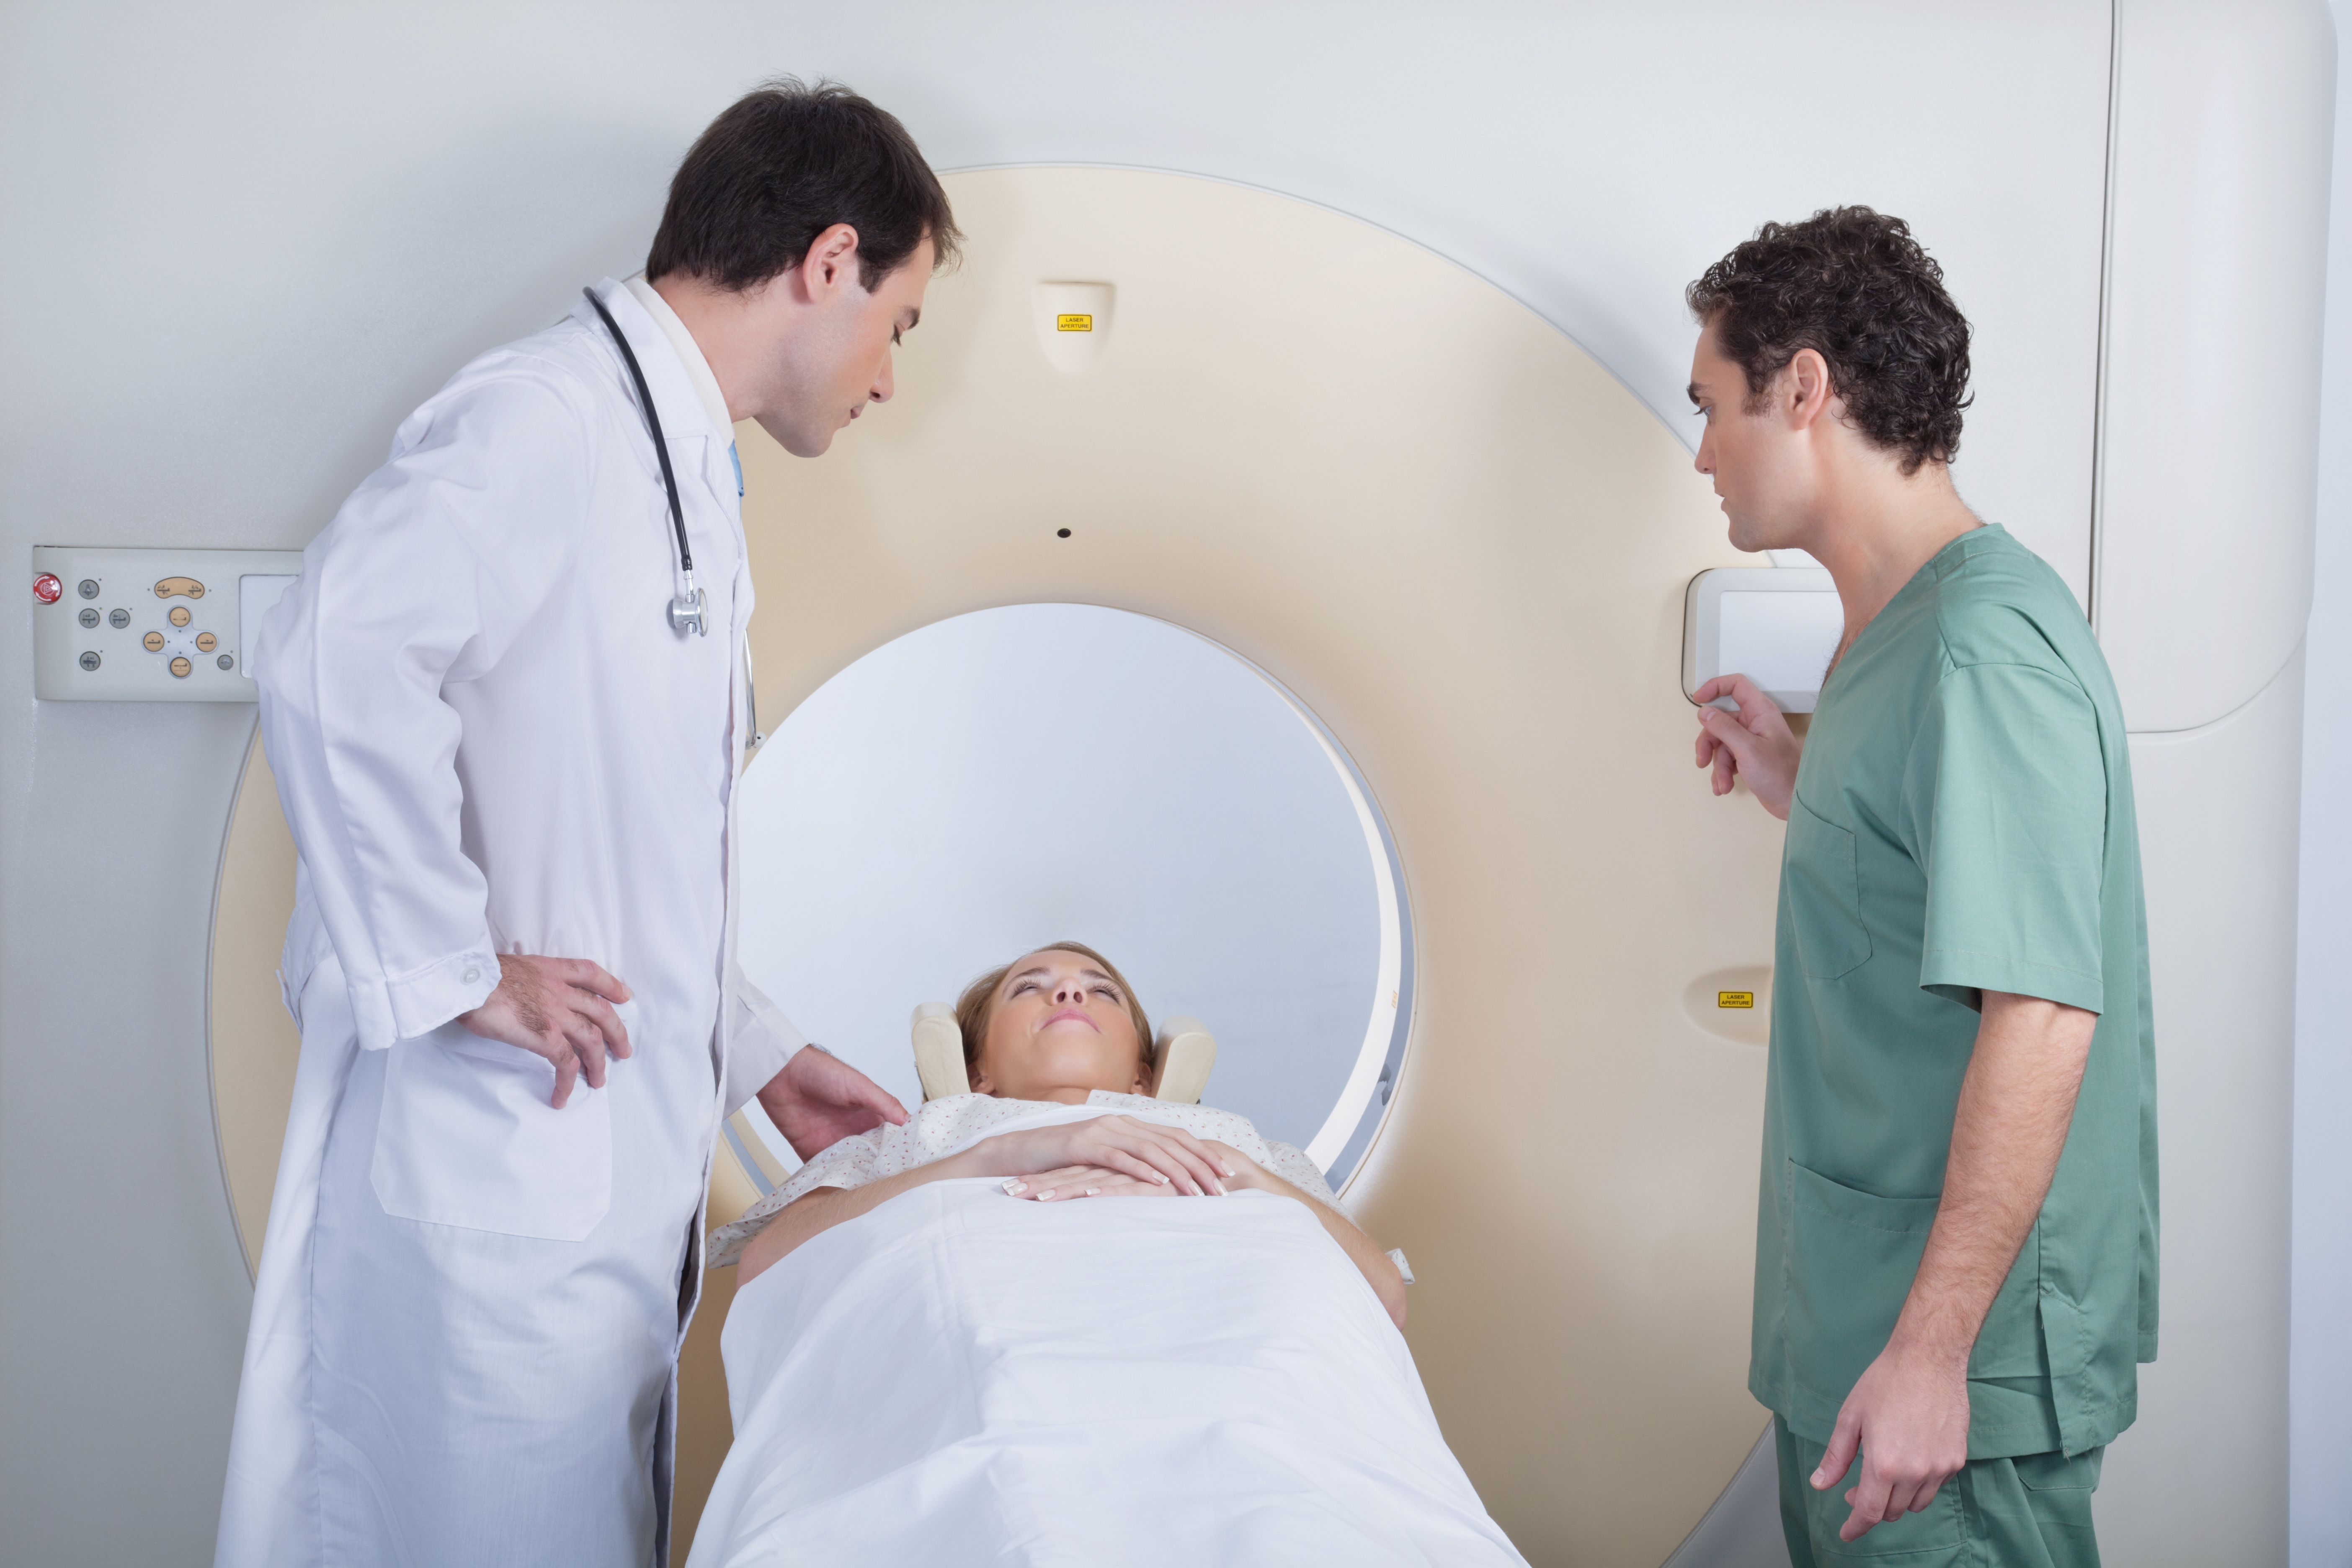 Doctor with technician examining patient before CT scan test